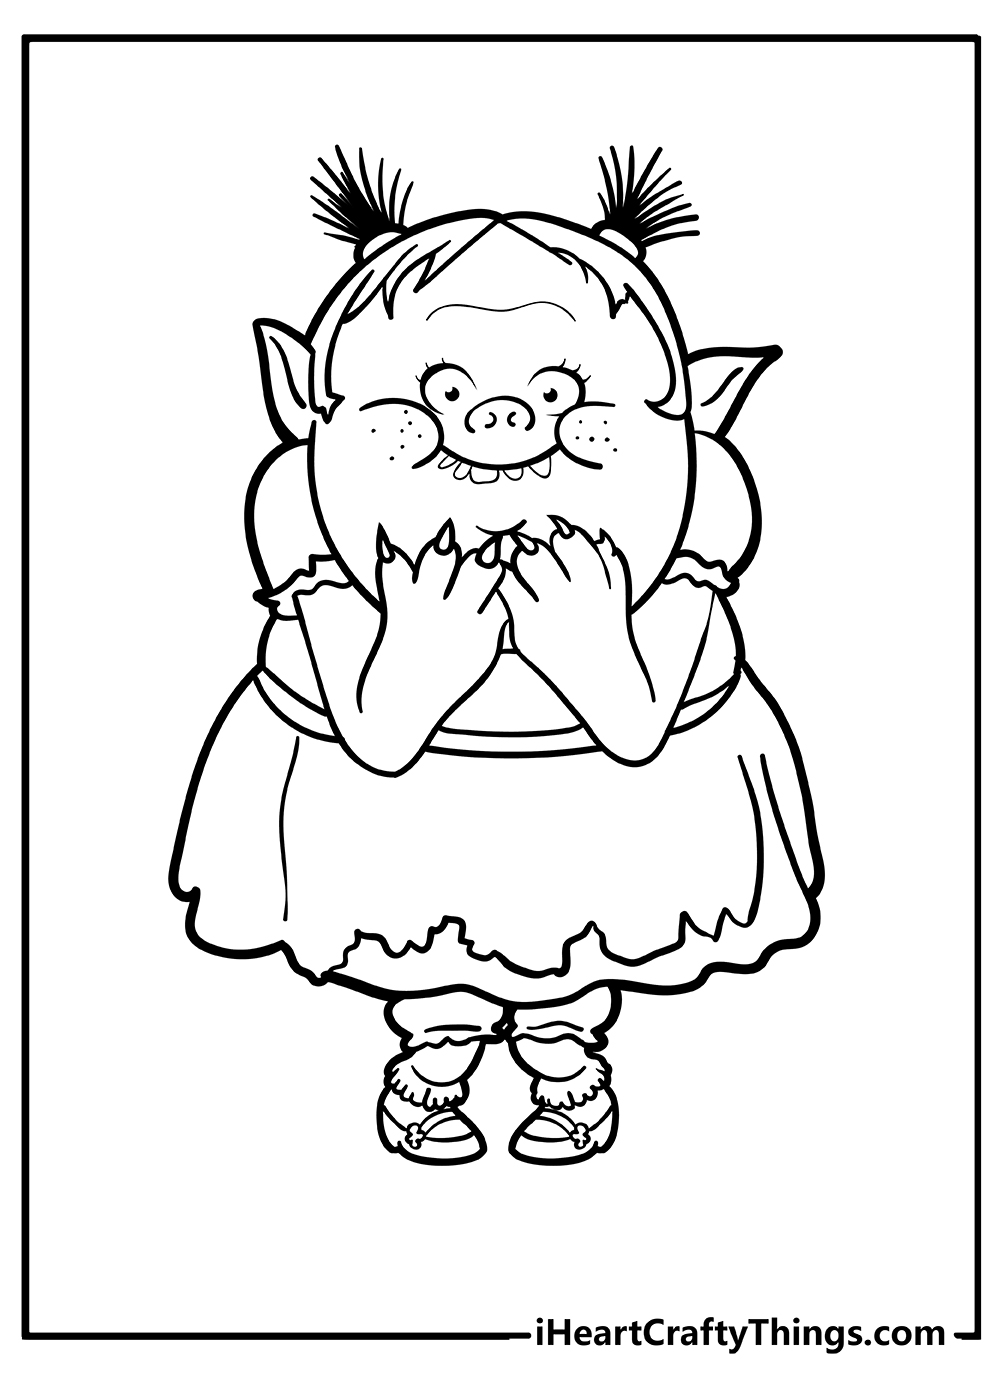 Troll Easy Coloring Pages